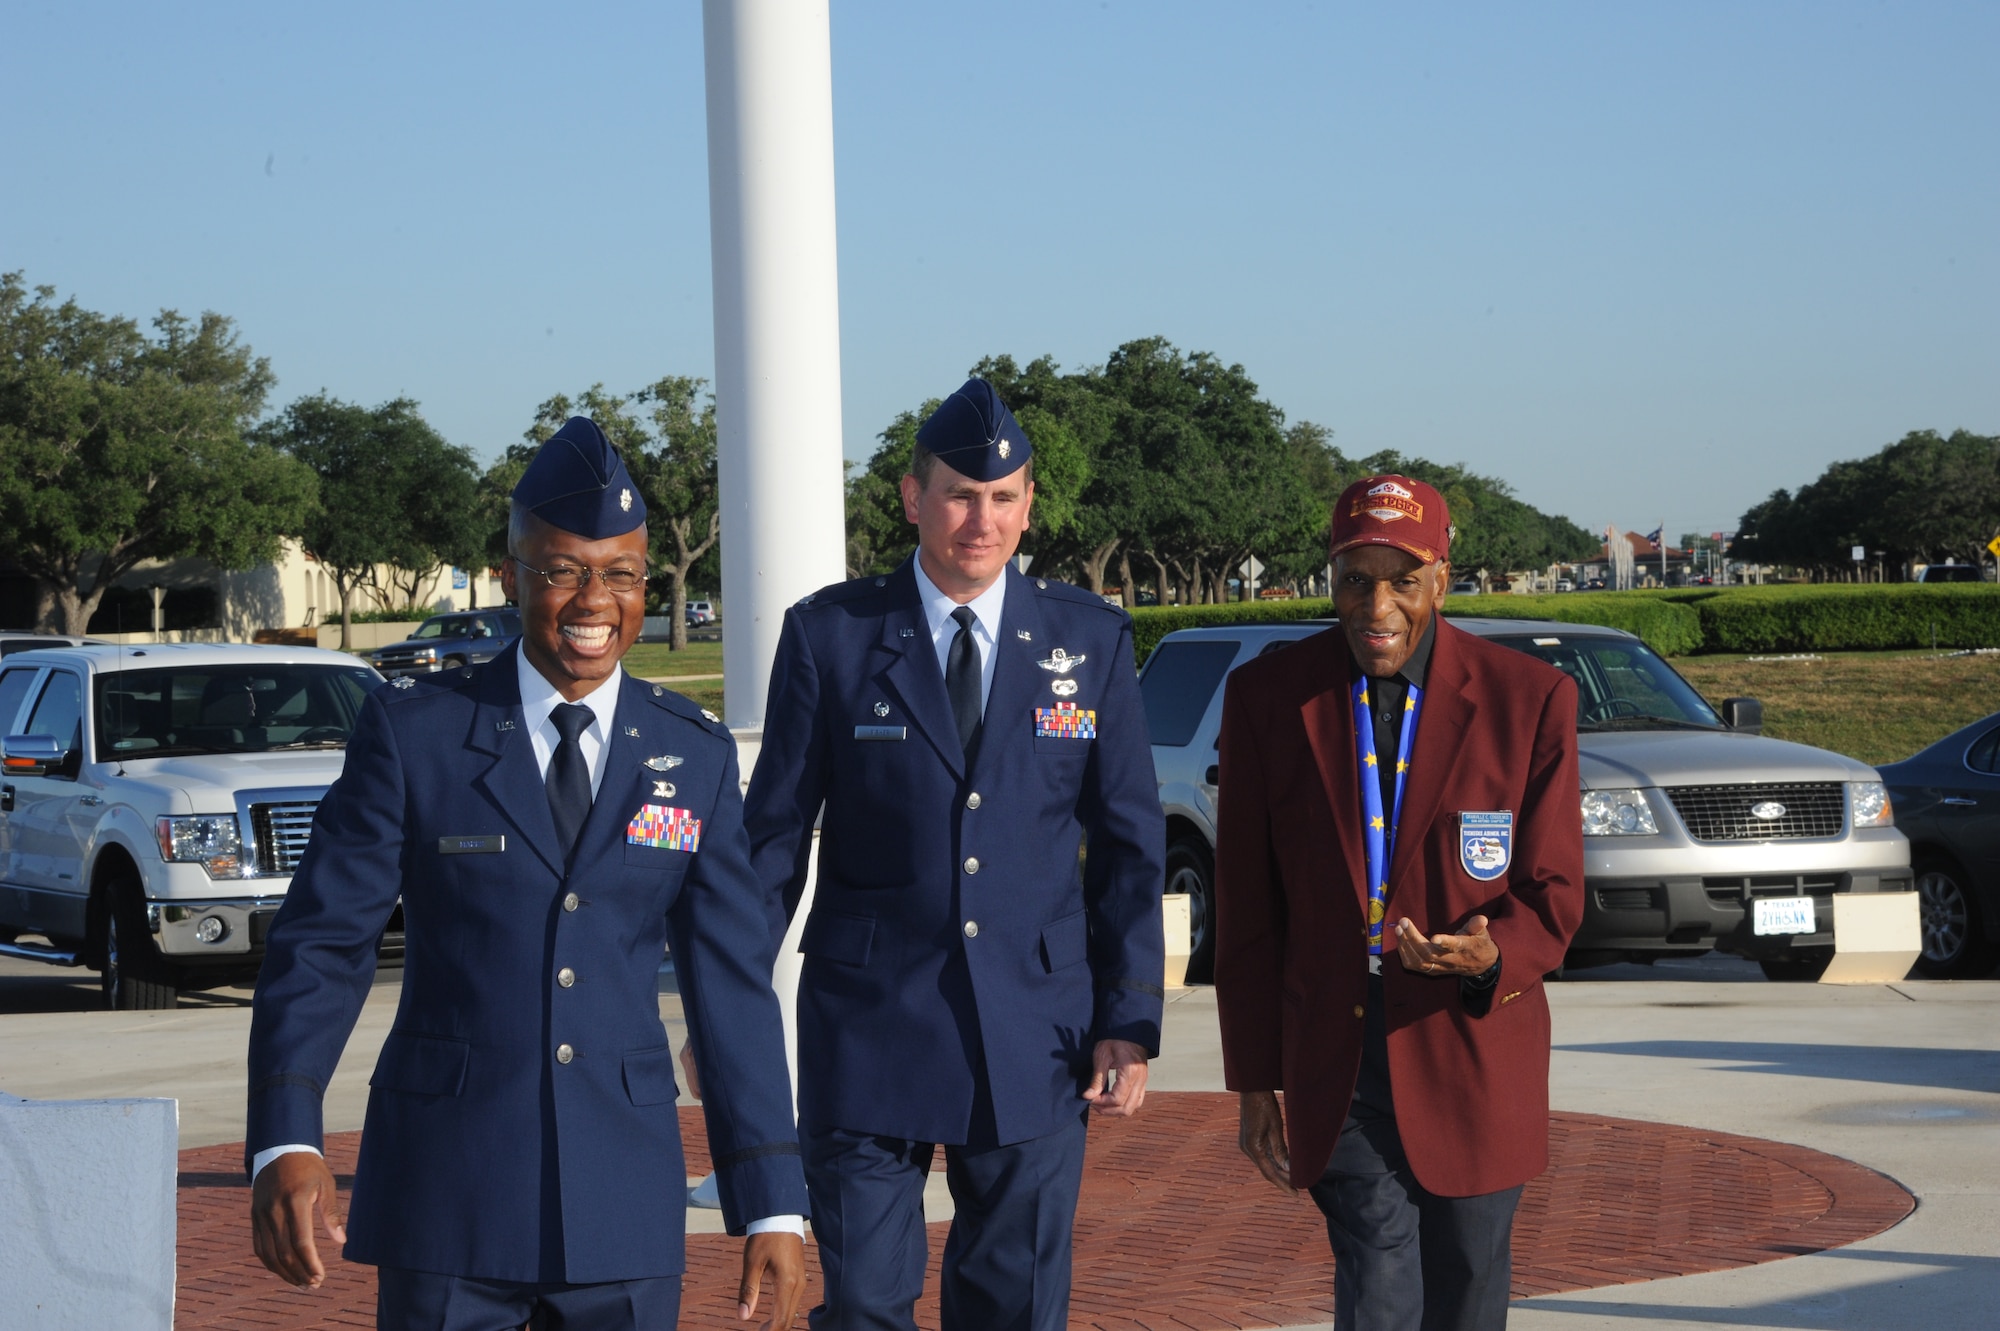 Lt. Col. Gavin Marks (left), 99th Flying Training Squadron director of operations, and Lt. Col. James Fisher, 99th FTS commander, greet Dr. Granville Coggs, Tuskegee Airman, as he arrives at the Taj Mahal Monday for the Tuskegee Heritage Breakfast. The 99th FlyingTraining Squadron's fourth annual Tuskegee Heritage Breakfast paid tribute to the legacy of the segregated fighter group that fought fascism abroad and racism at home during World War II. (U.S. Air Force photo/Rich McFadden) 